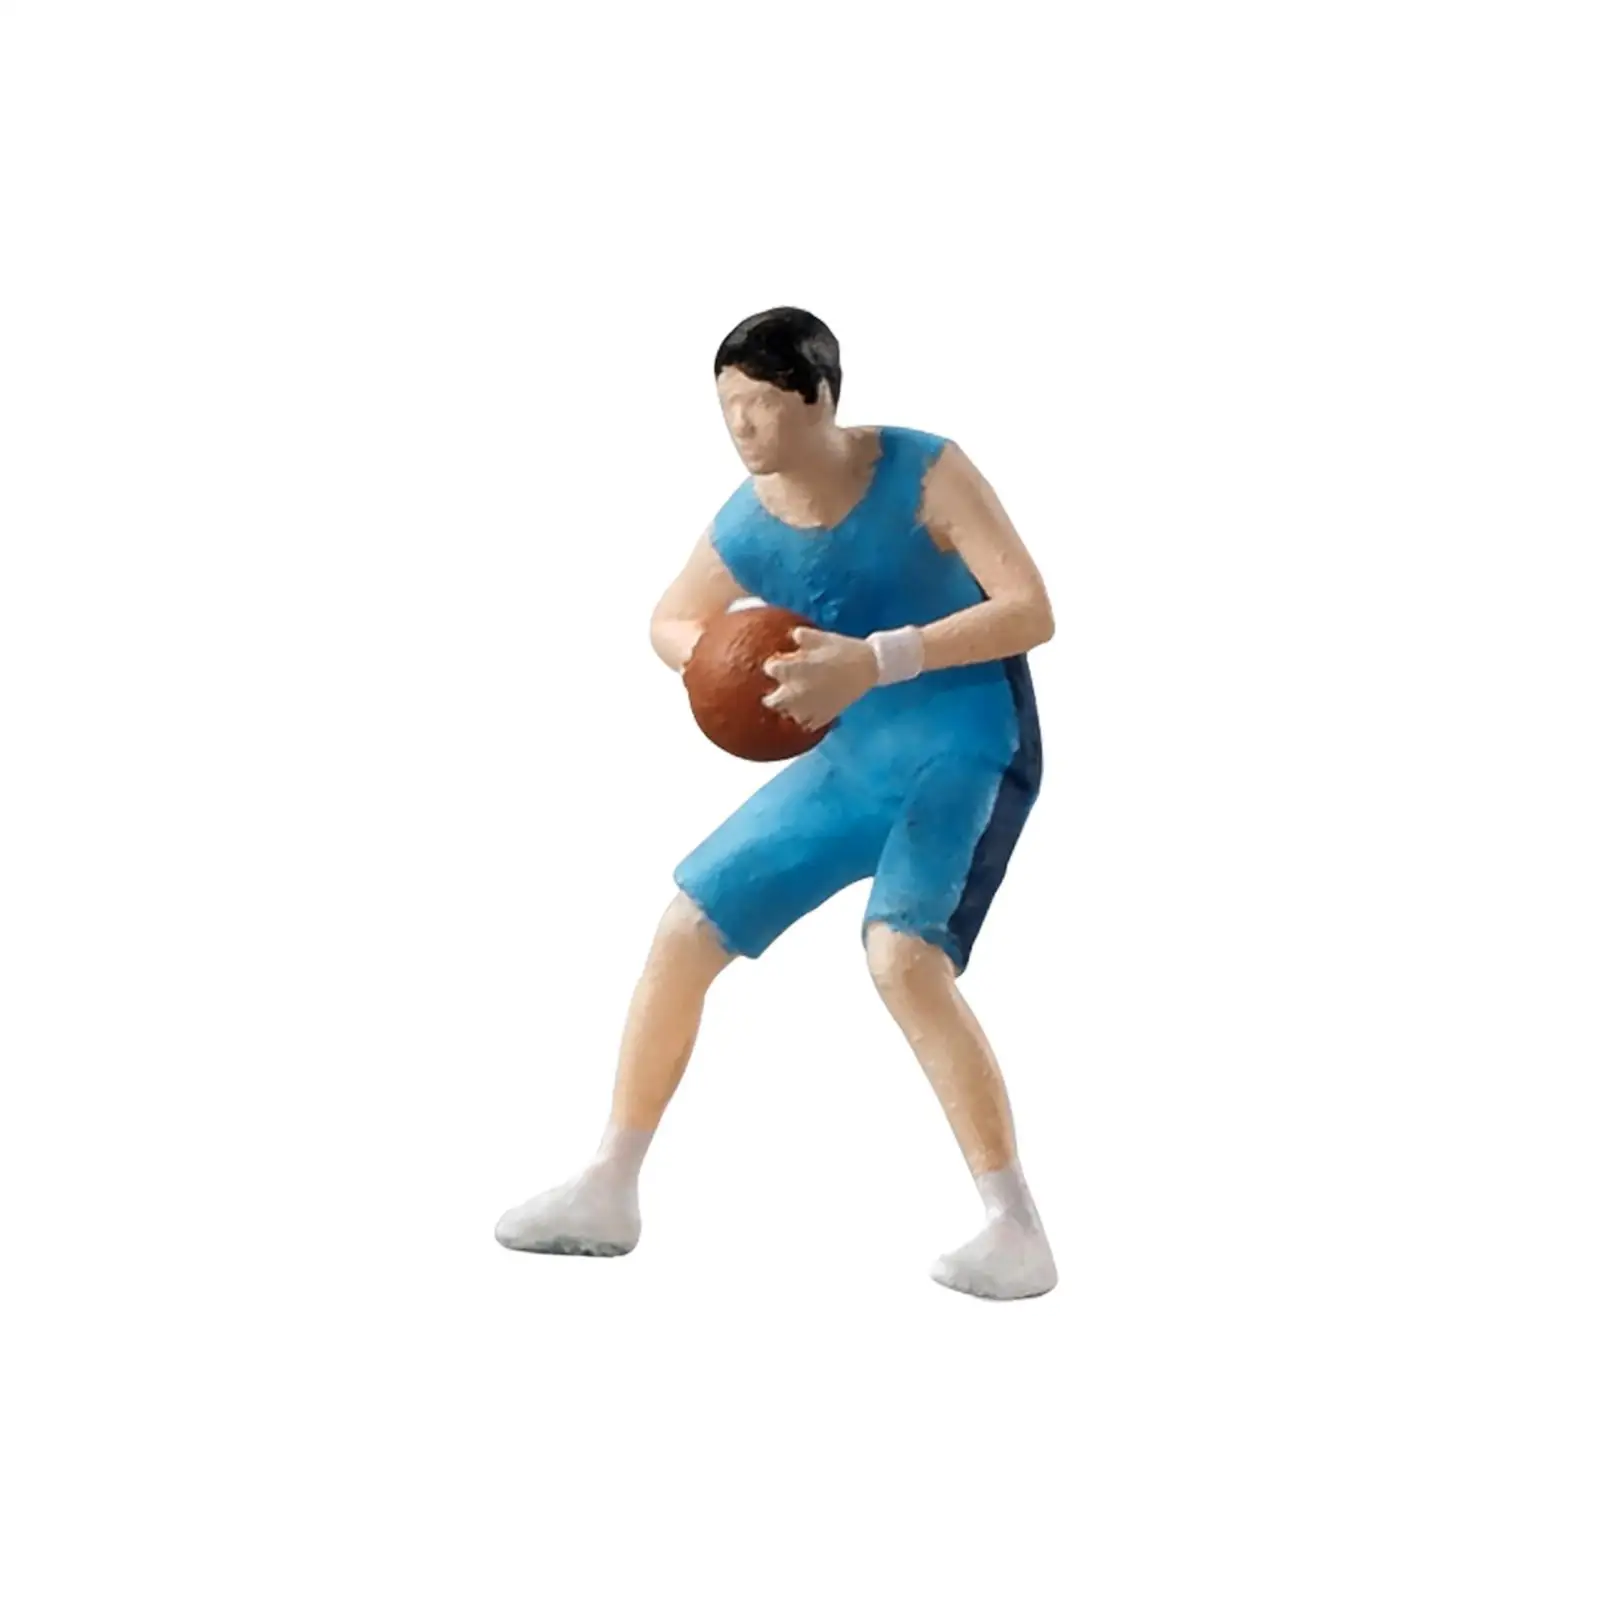 1:64 People Figures Trains Architectural People Figures Basketball Boy Figures for Photography Props Diorama DIY Scene Ornament